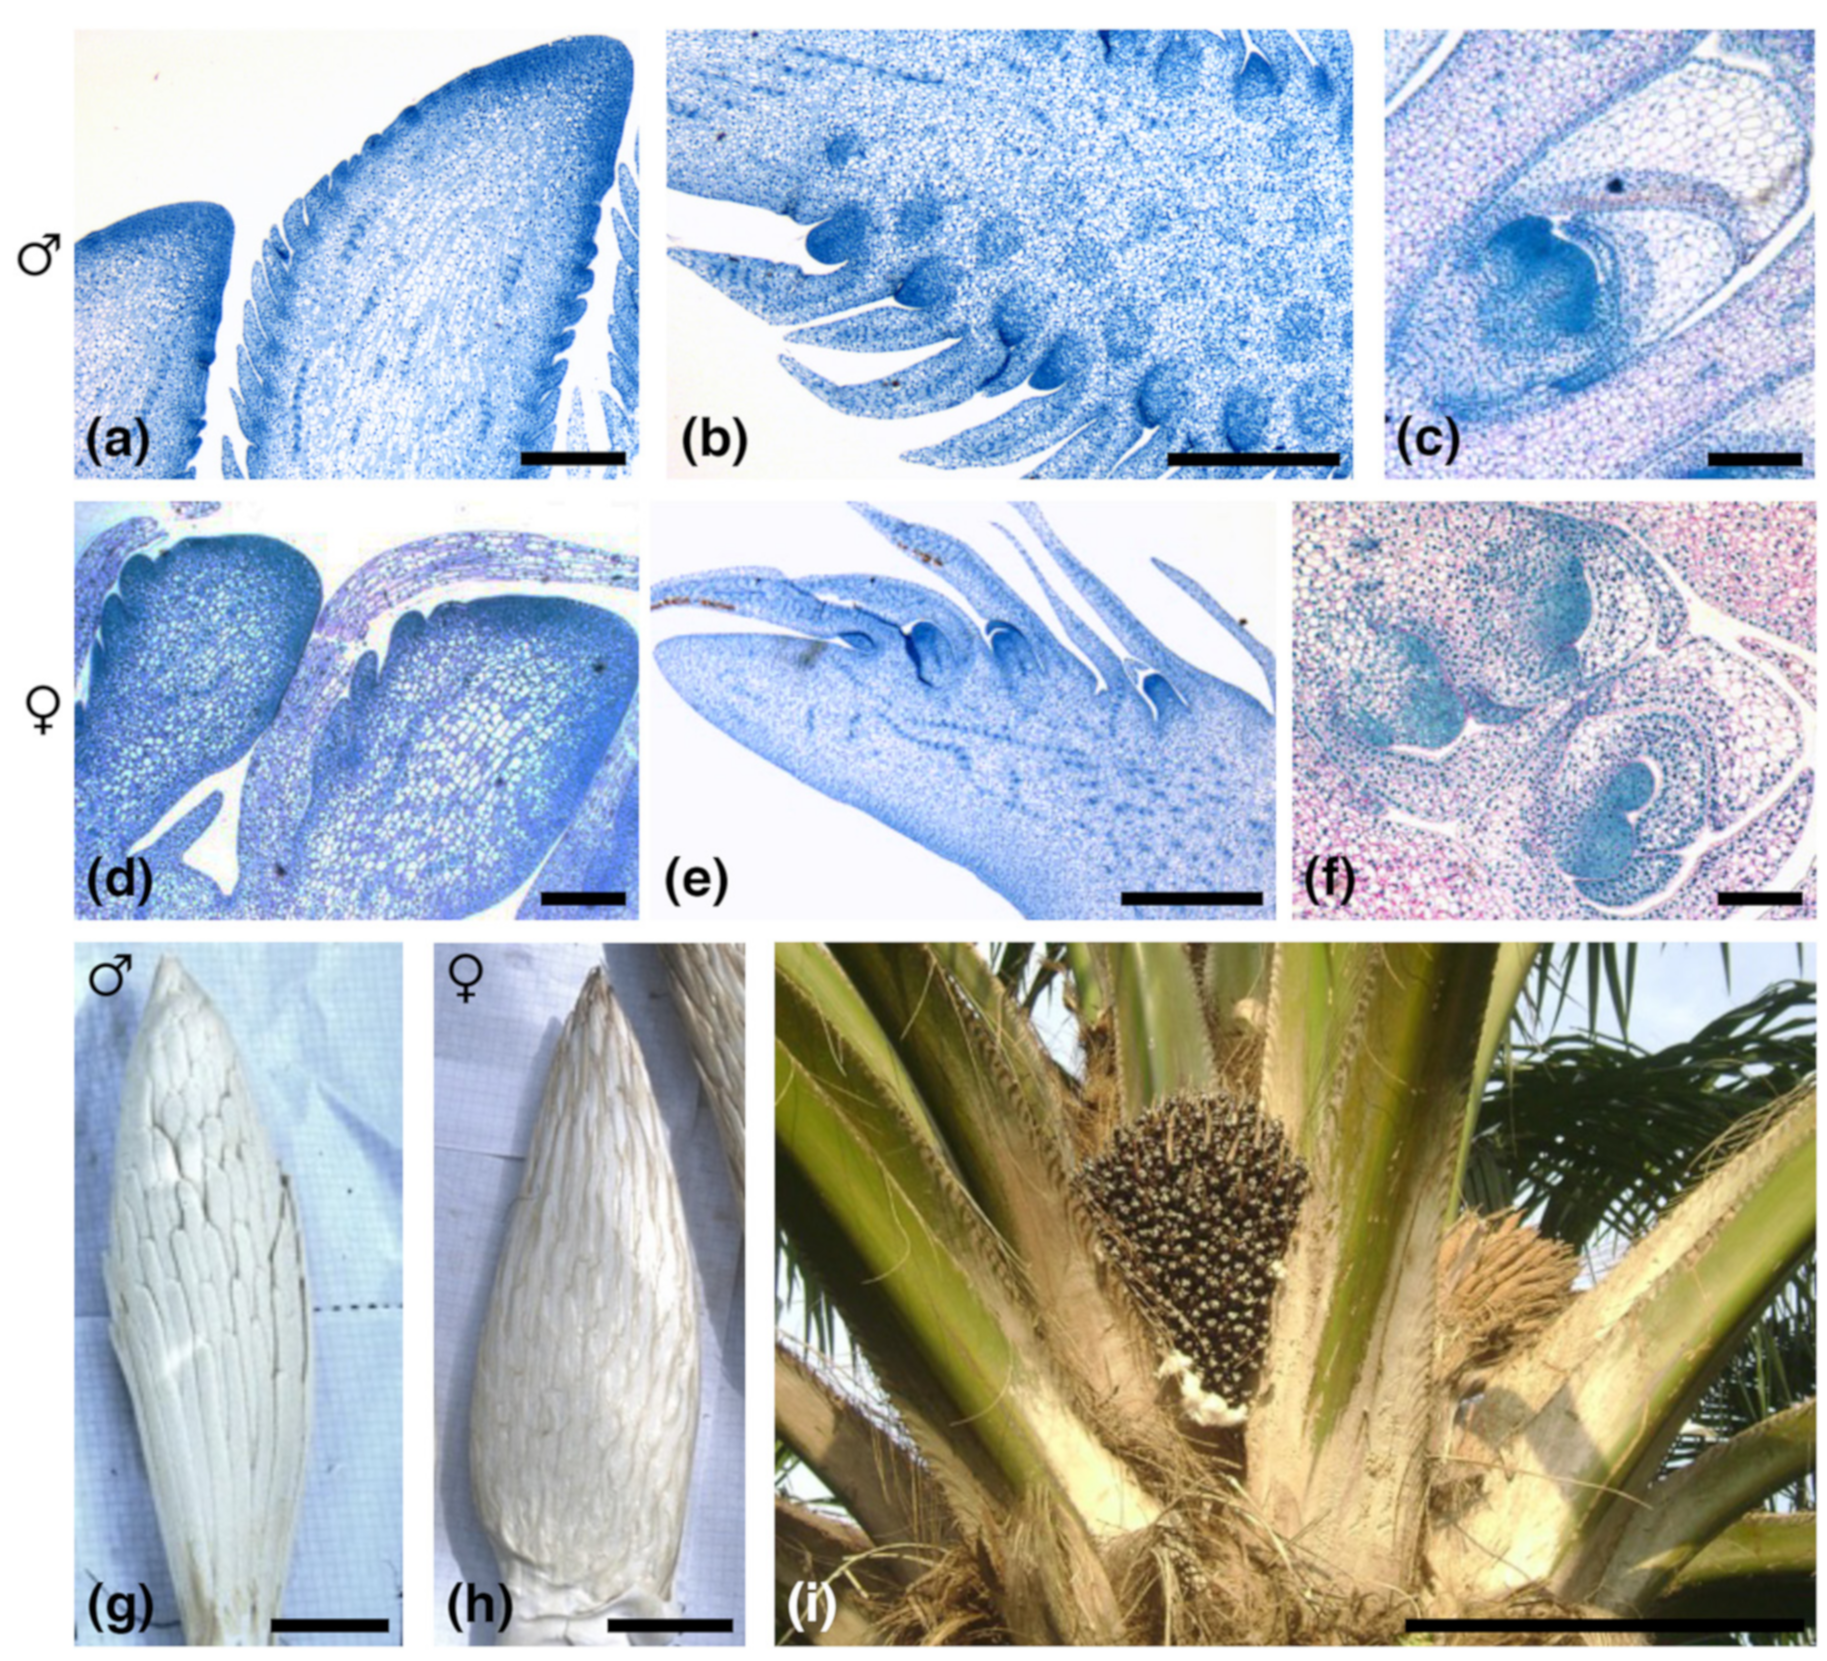 Plants | Free Full-Text | Micro-RNA-Regulated SQUAMOSA-PROMOTER BINDING  PROTEIN-LIKE (SPL) Gene Expression and Cytokinin Accumulation Distinguish  Early-Developing Male and Female Inflorescences in Oil Palm (Elaeis  guineensis)